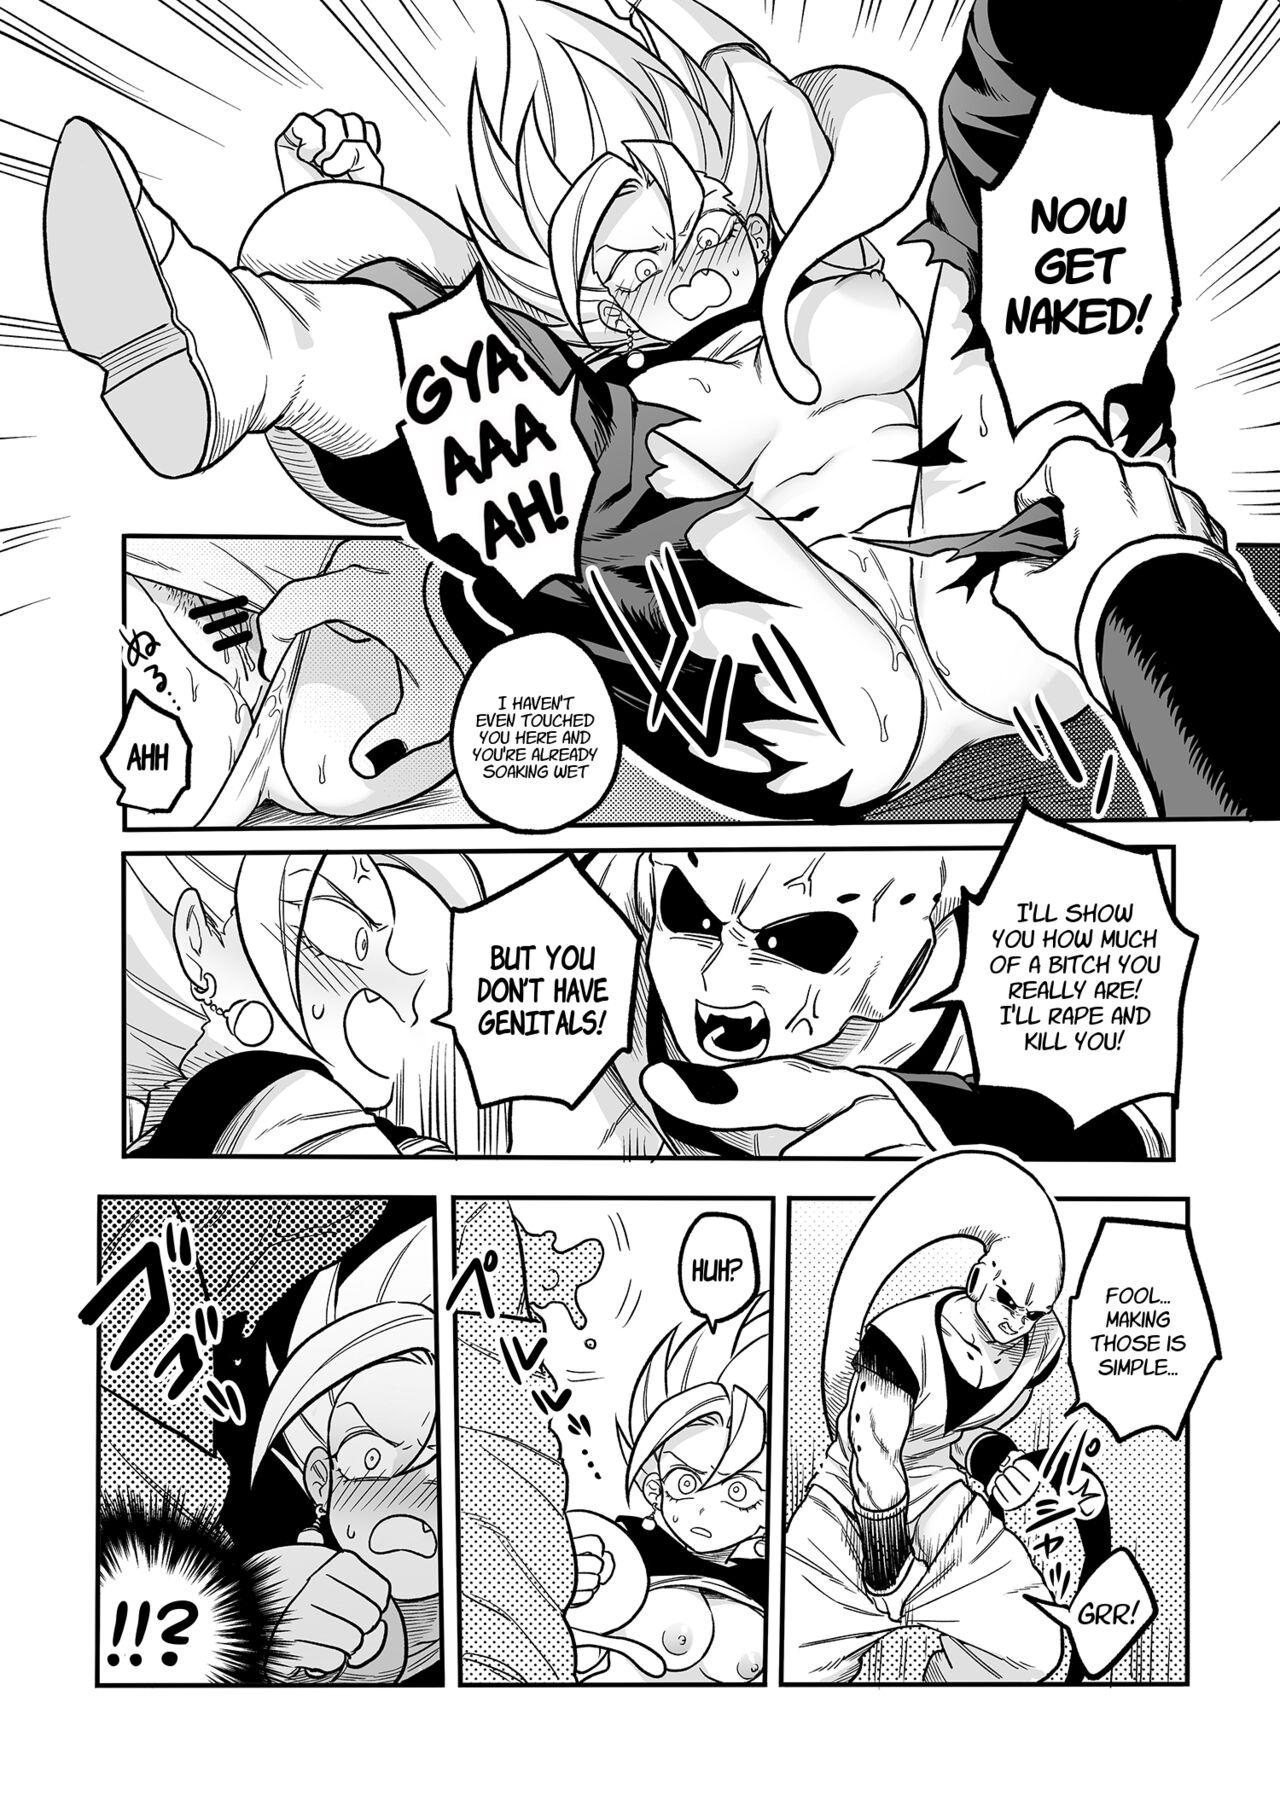 Outdoor You're Just a Small Fry Majin... - Dragon ball z Para - Page 6